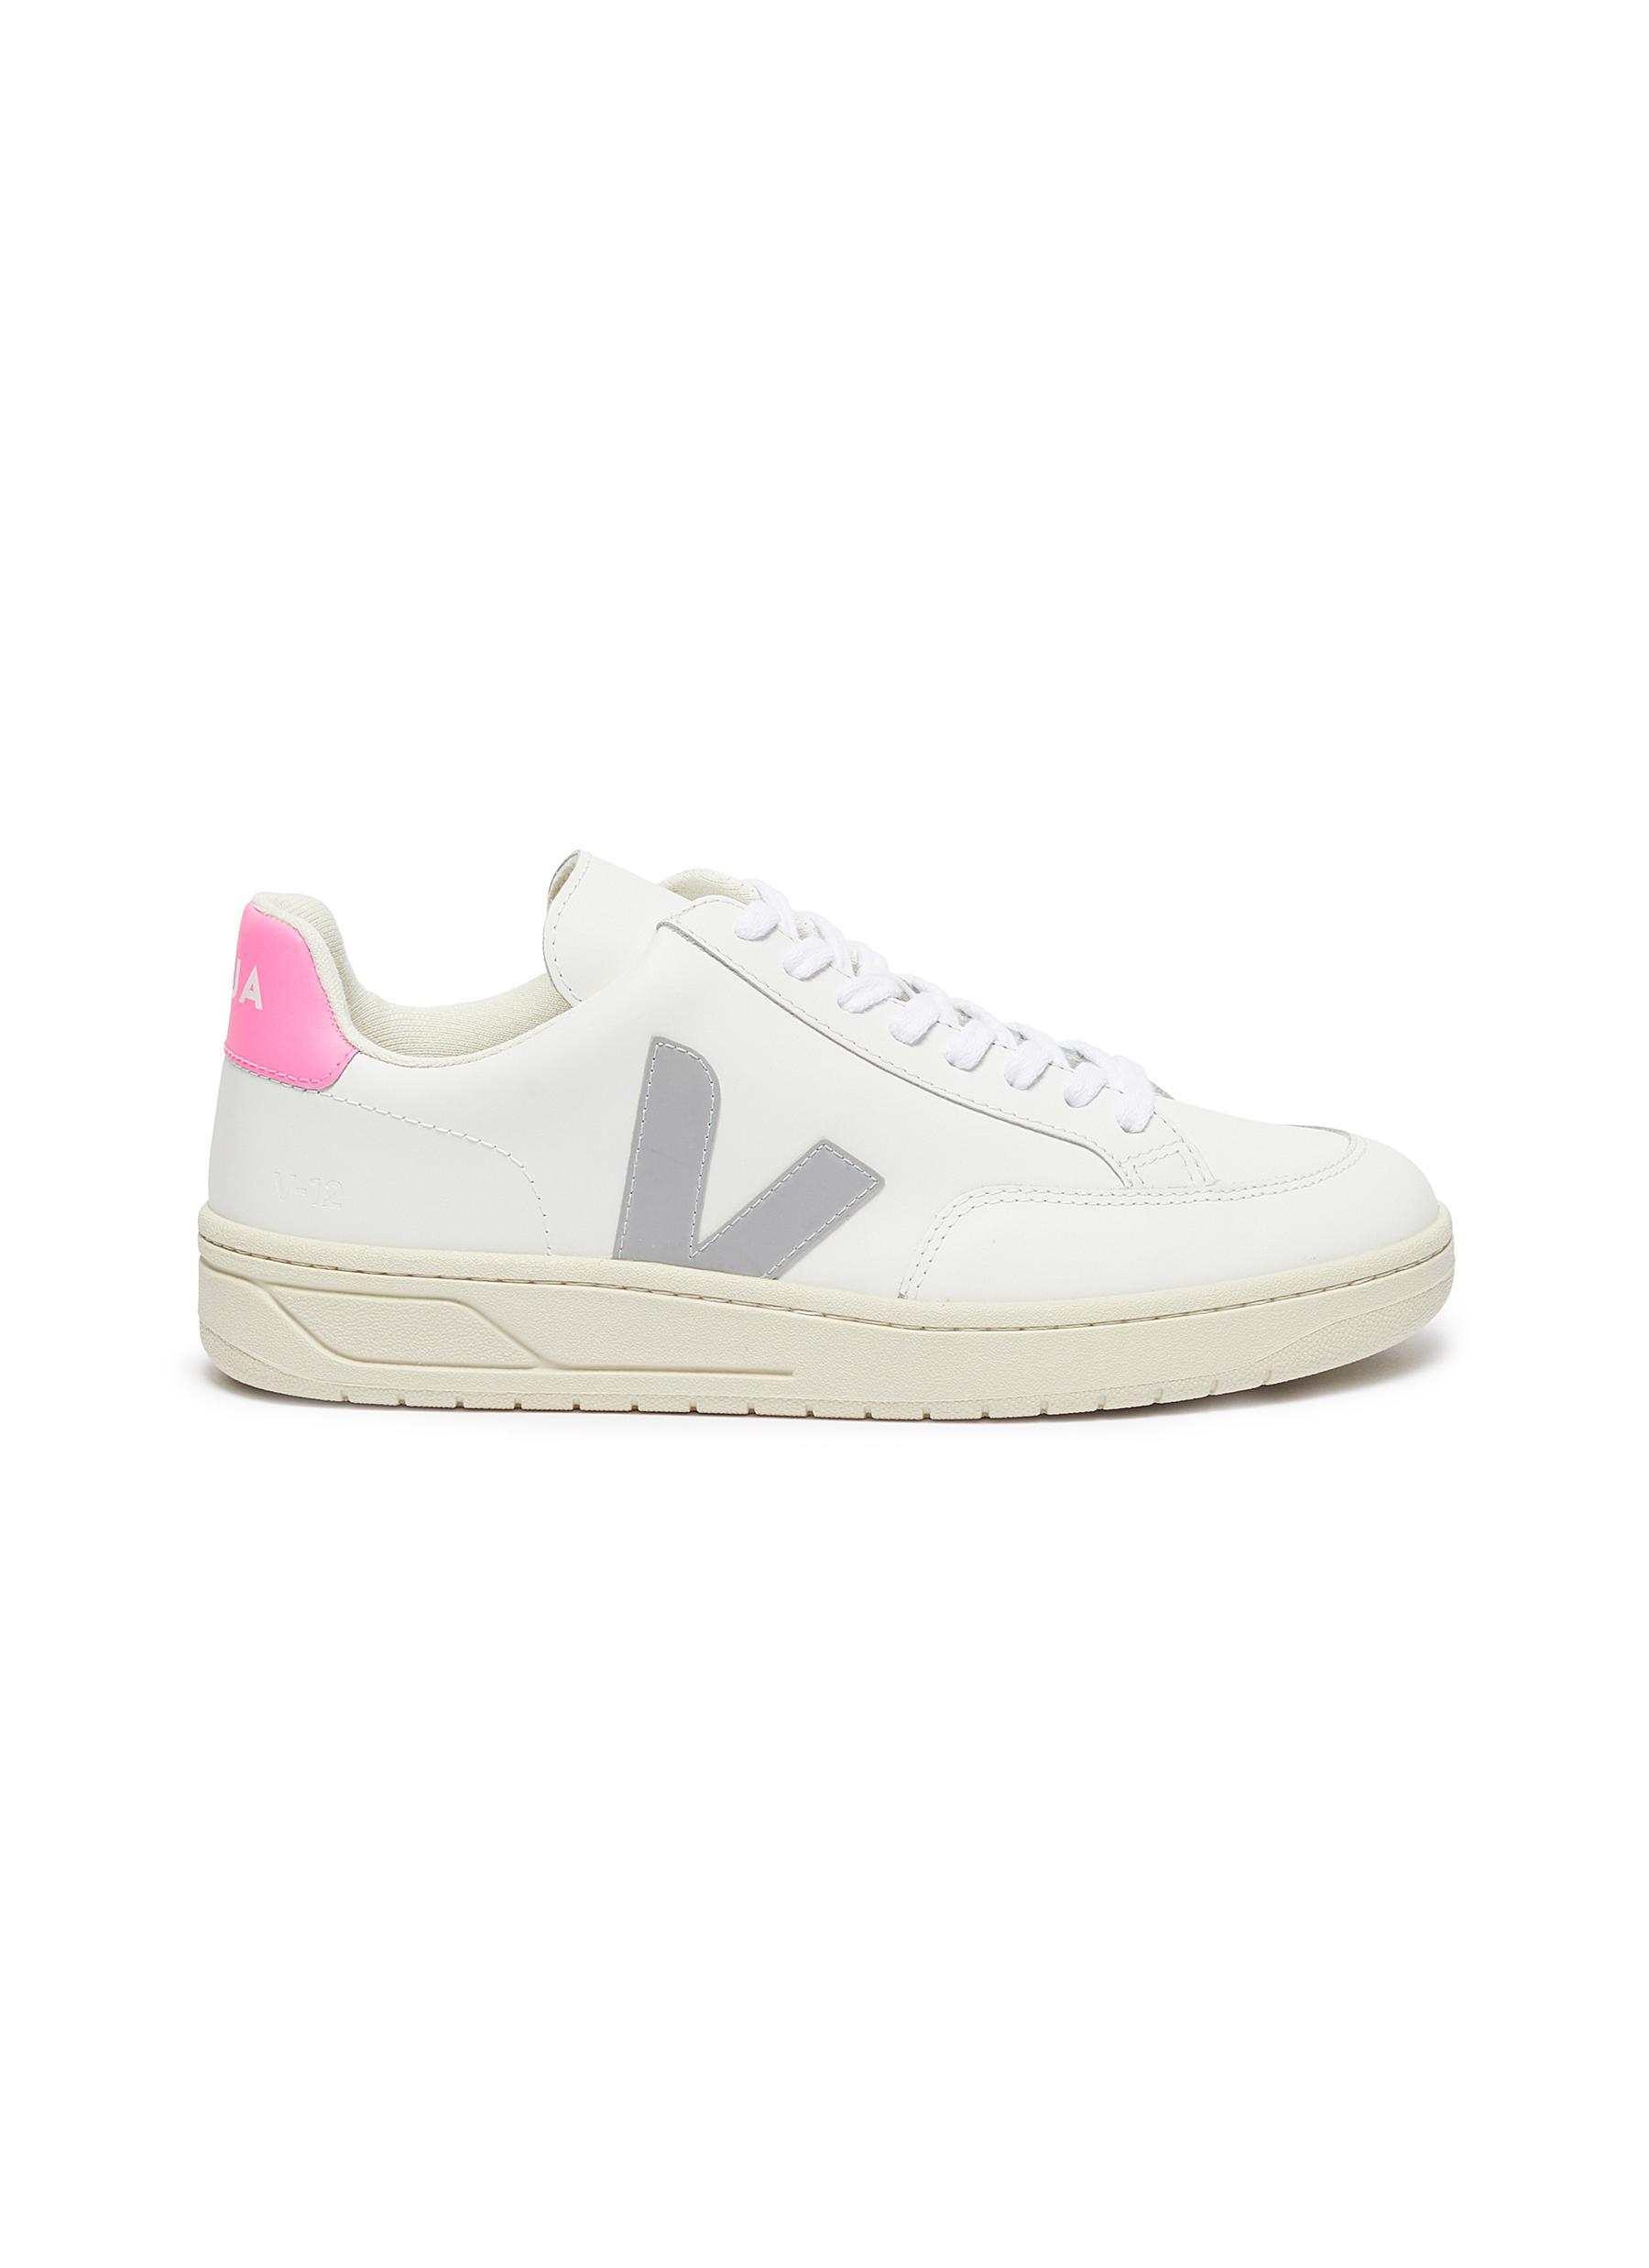 Veja Leather Sneakers in |